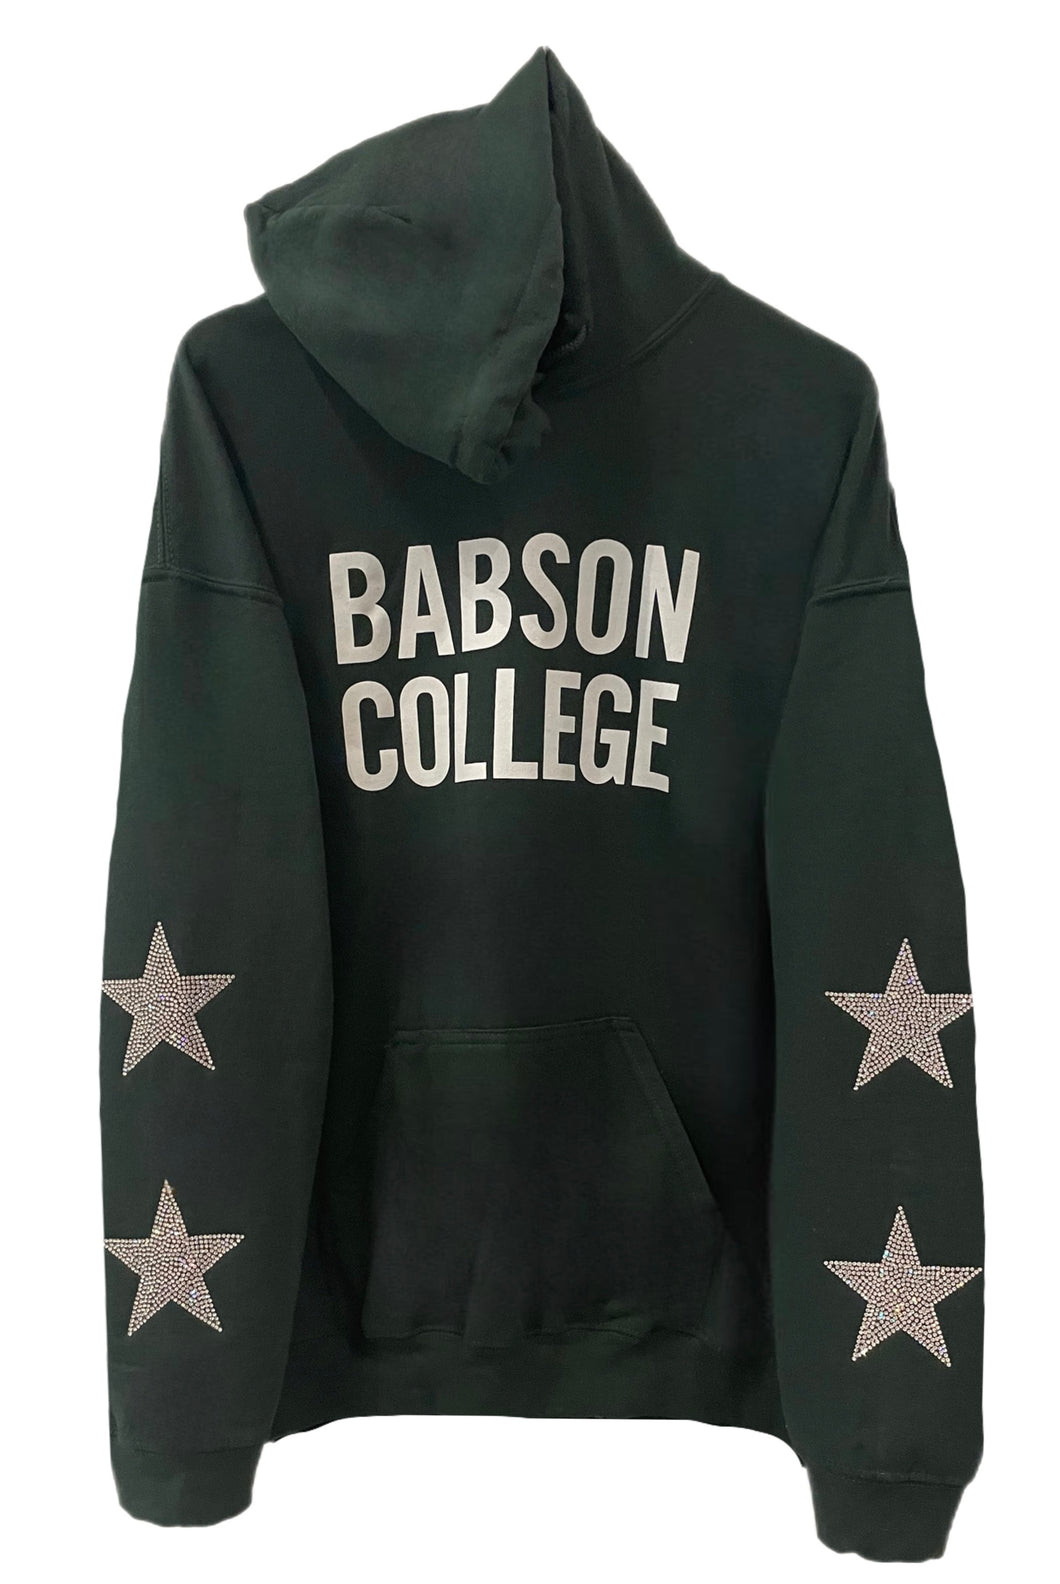 Babson College, One of a KIND Hoodie with Crystal Star Design.